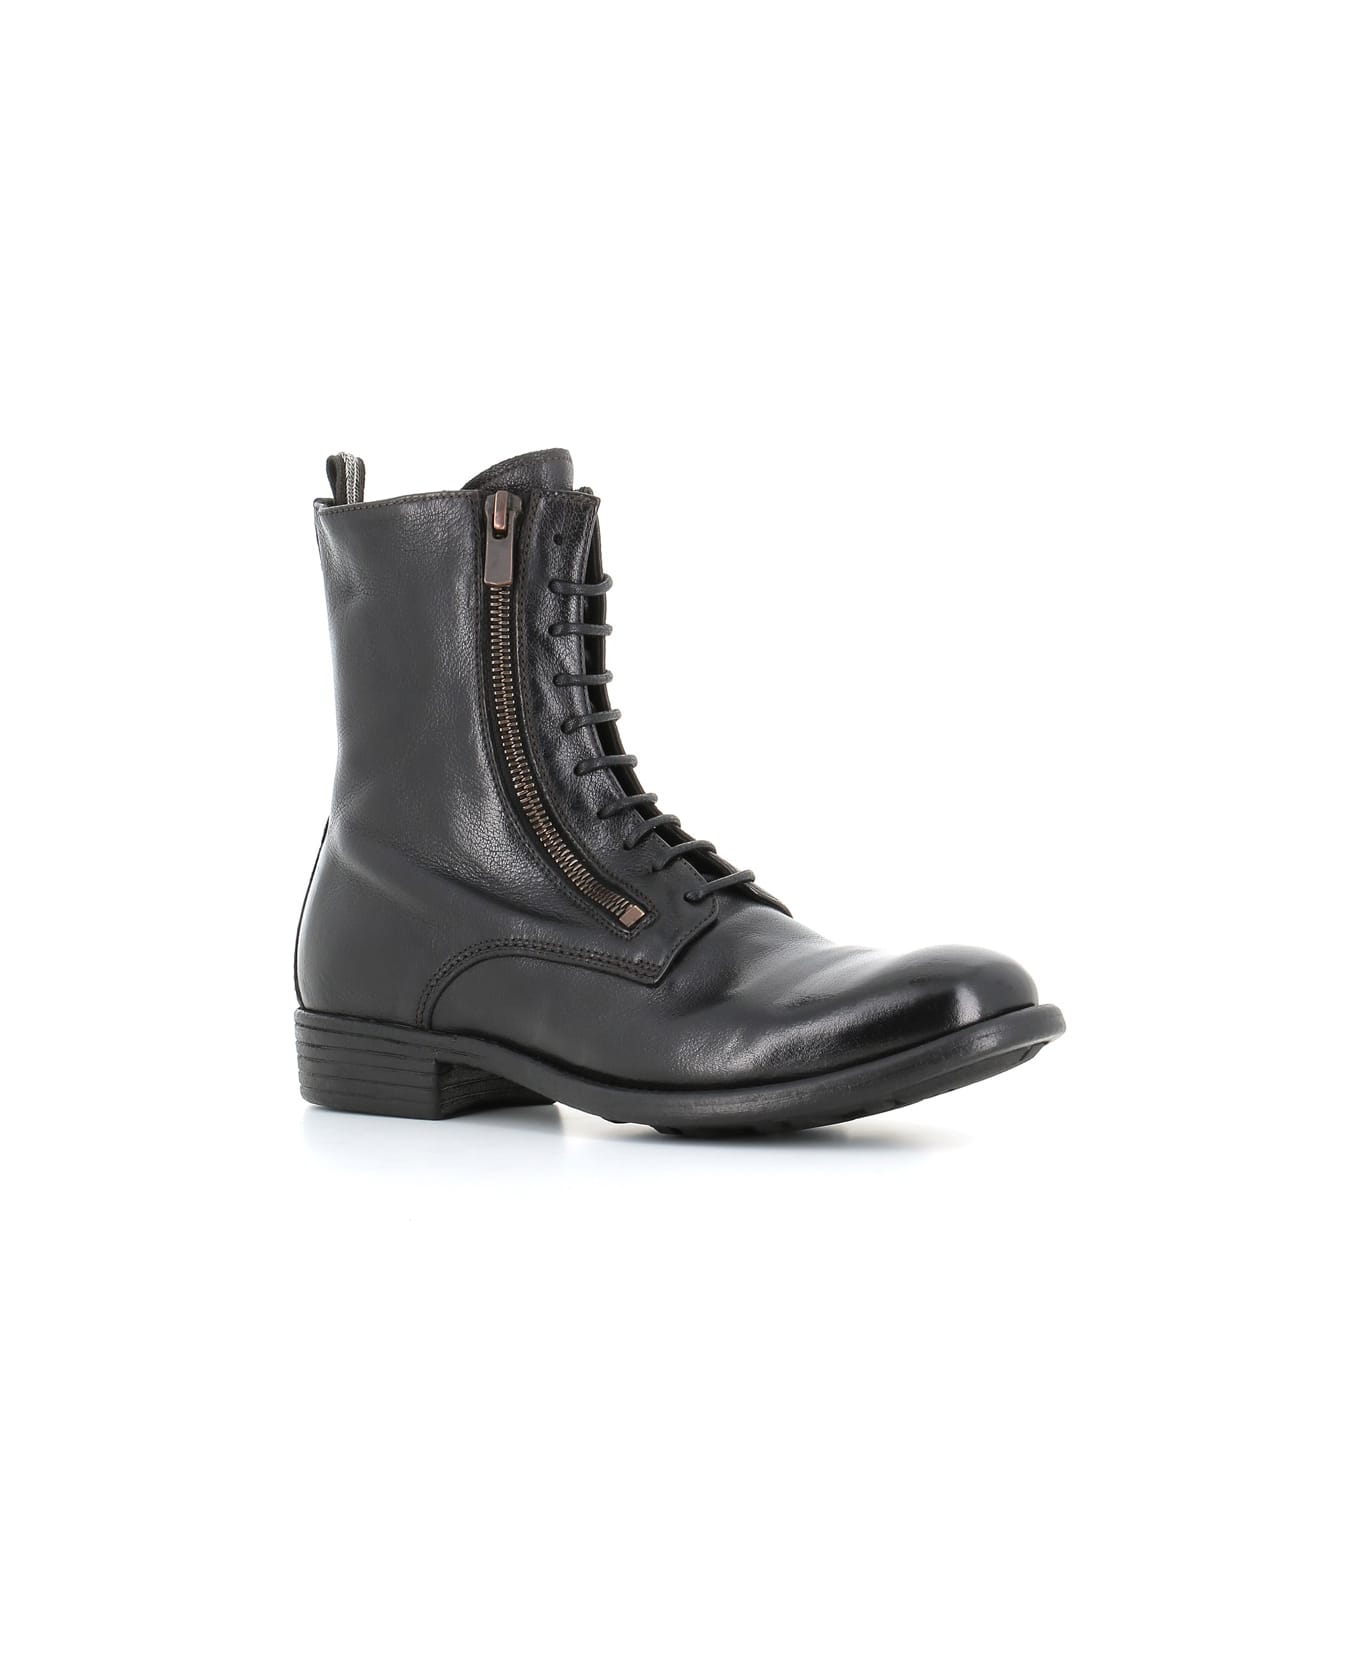 Officine Creative Lace-up Boot Calixte/051 - Black ブーツ